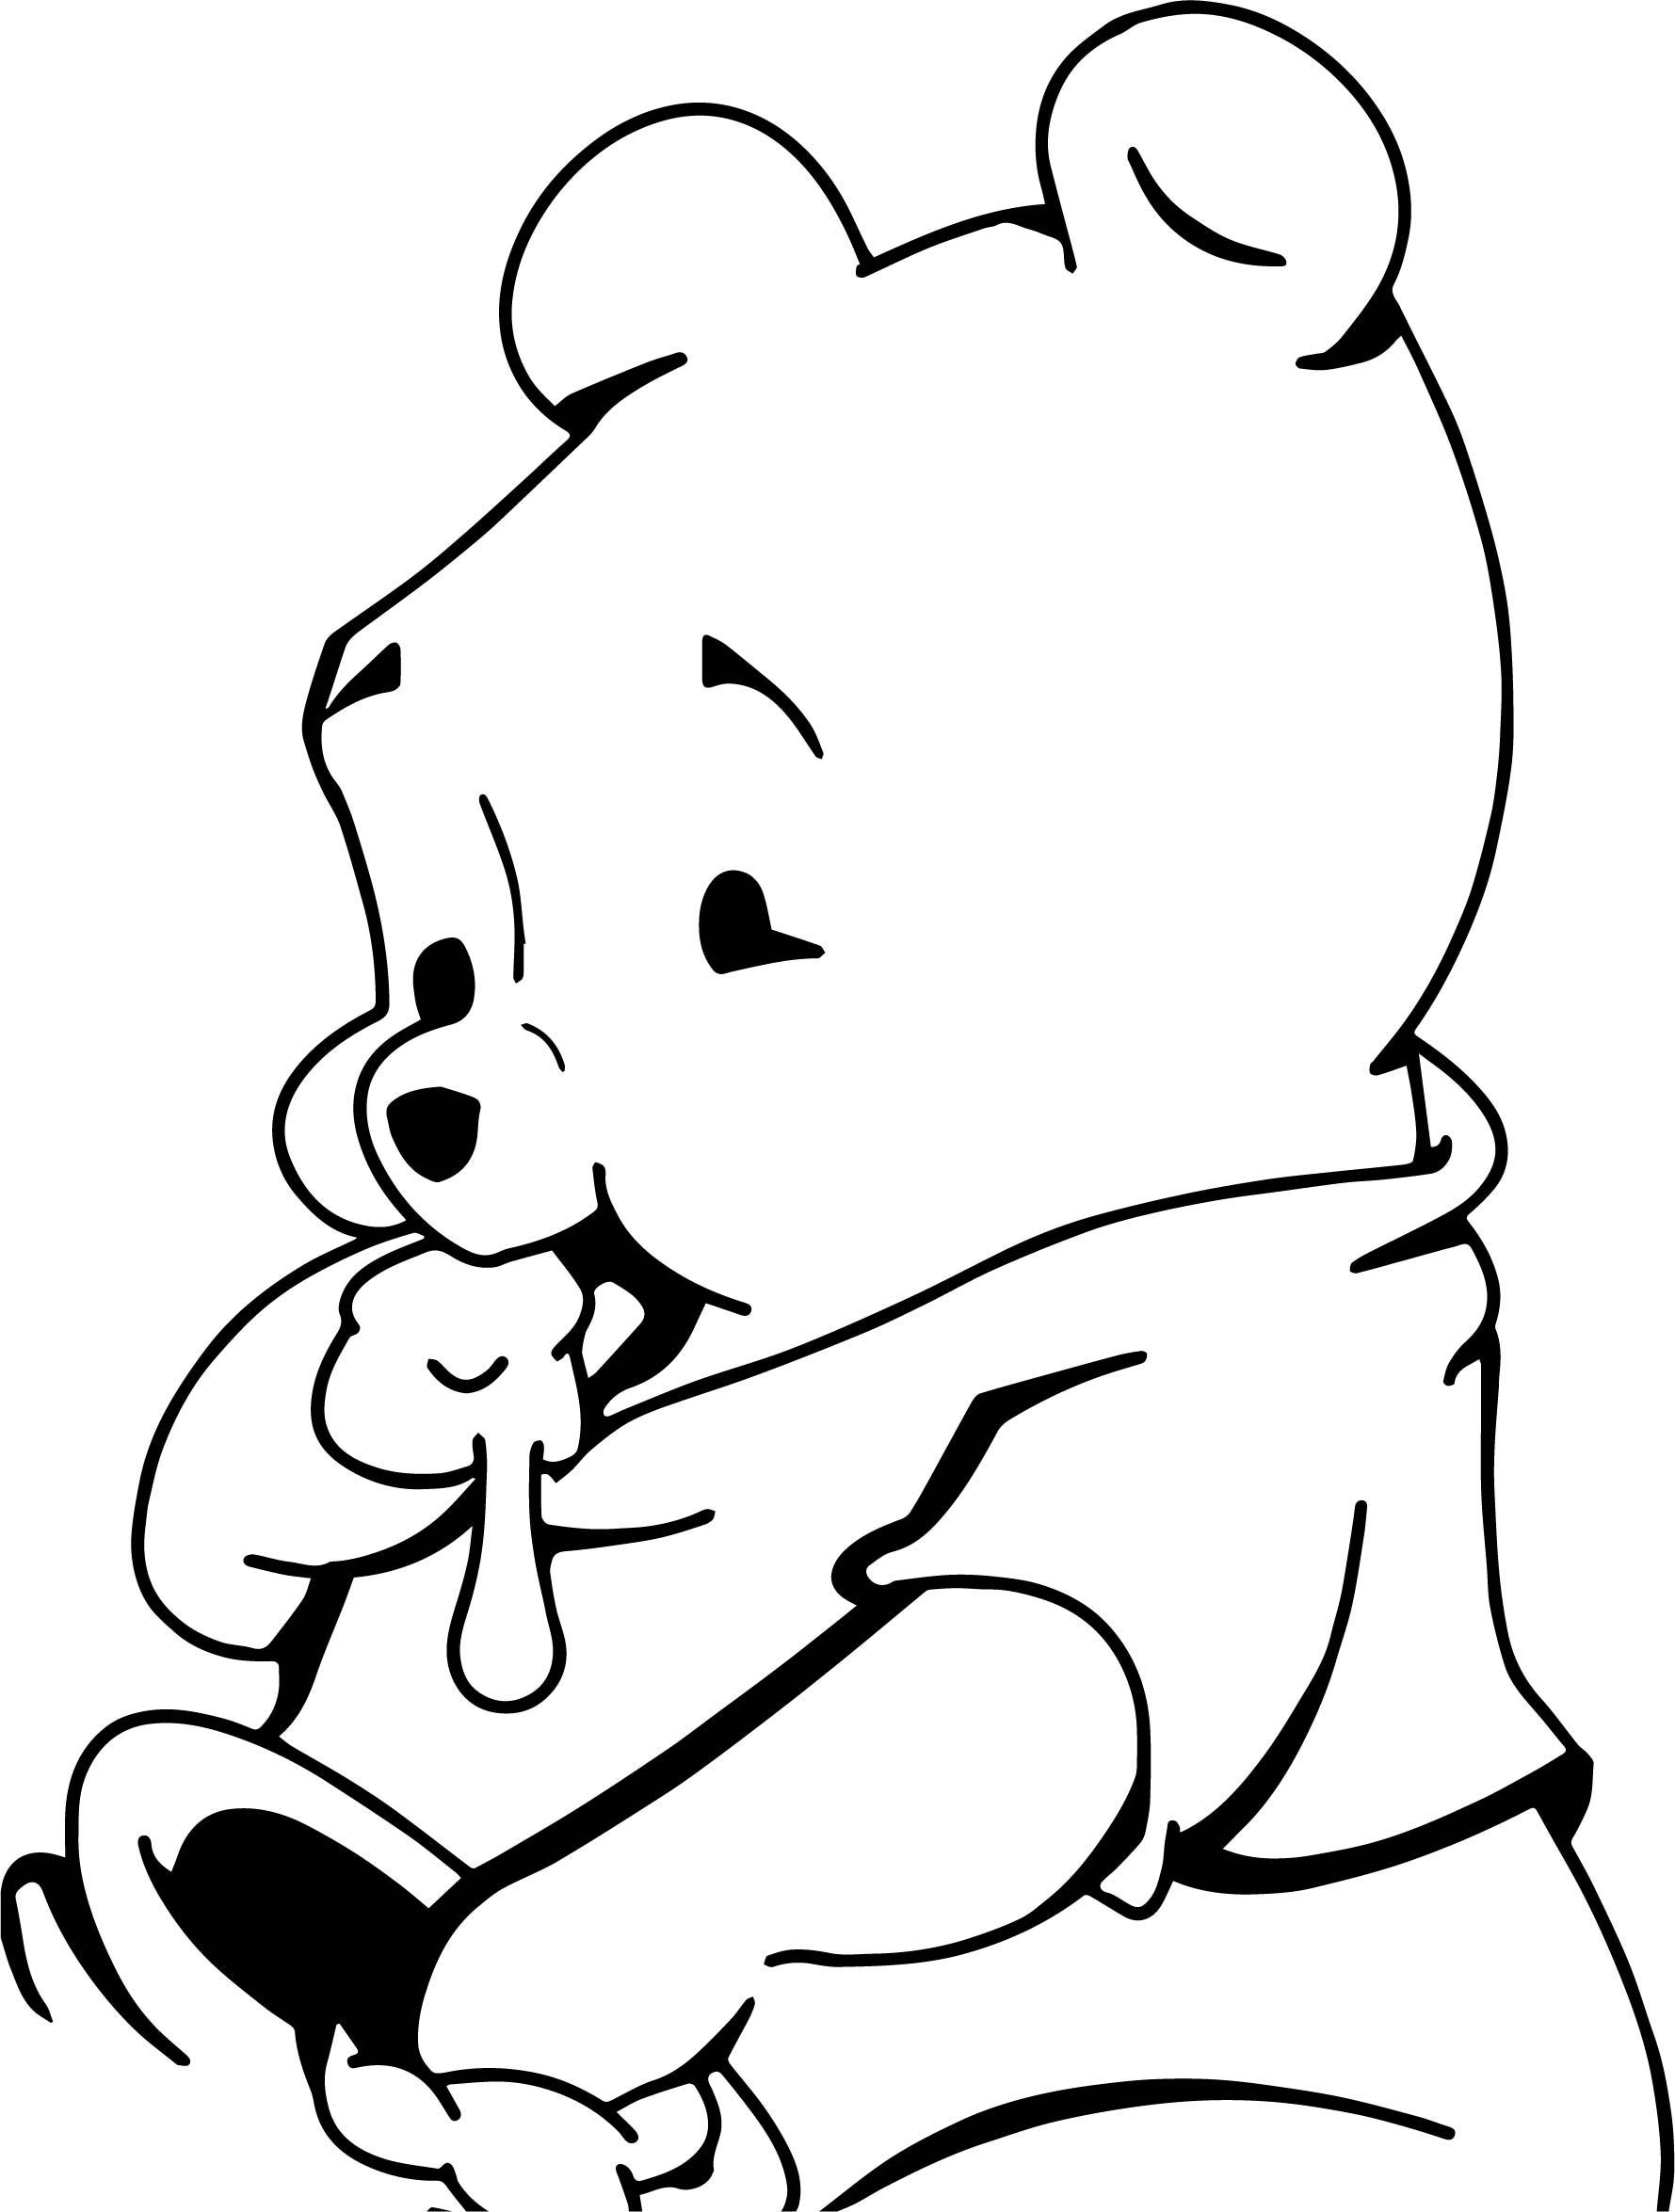 Winnie The Pooh Line Drawing | Free download on ClipArtMag